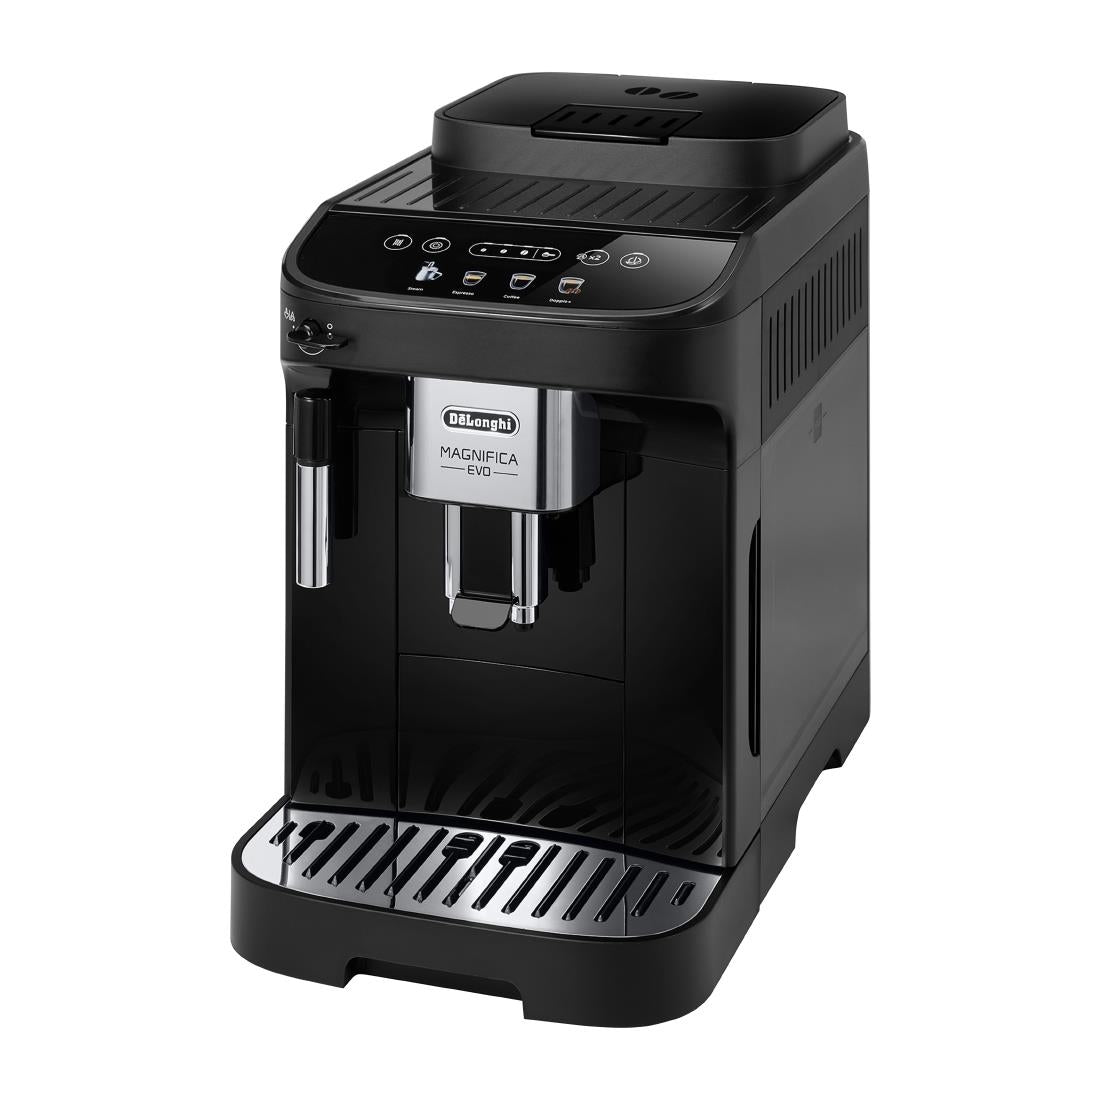 CH658 DeLonghi Magnifica Evo Bean to Cup Coffee Machine JD Catering Equipment Solutions Ltd